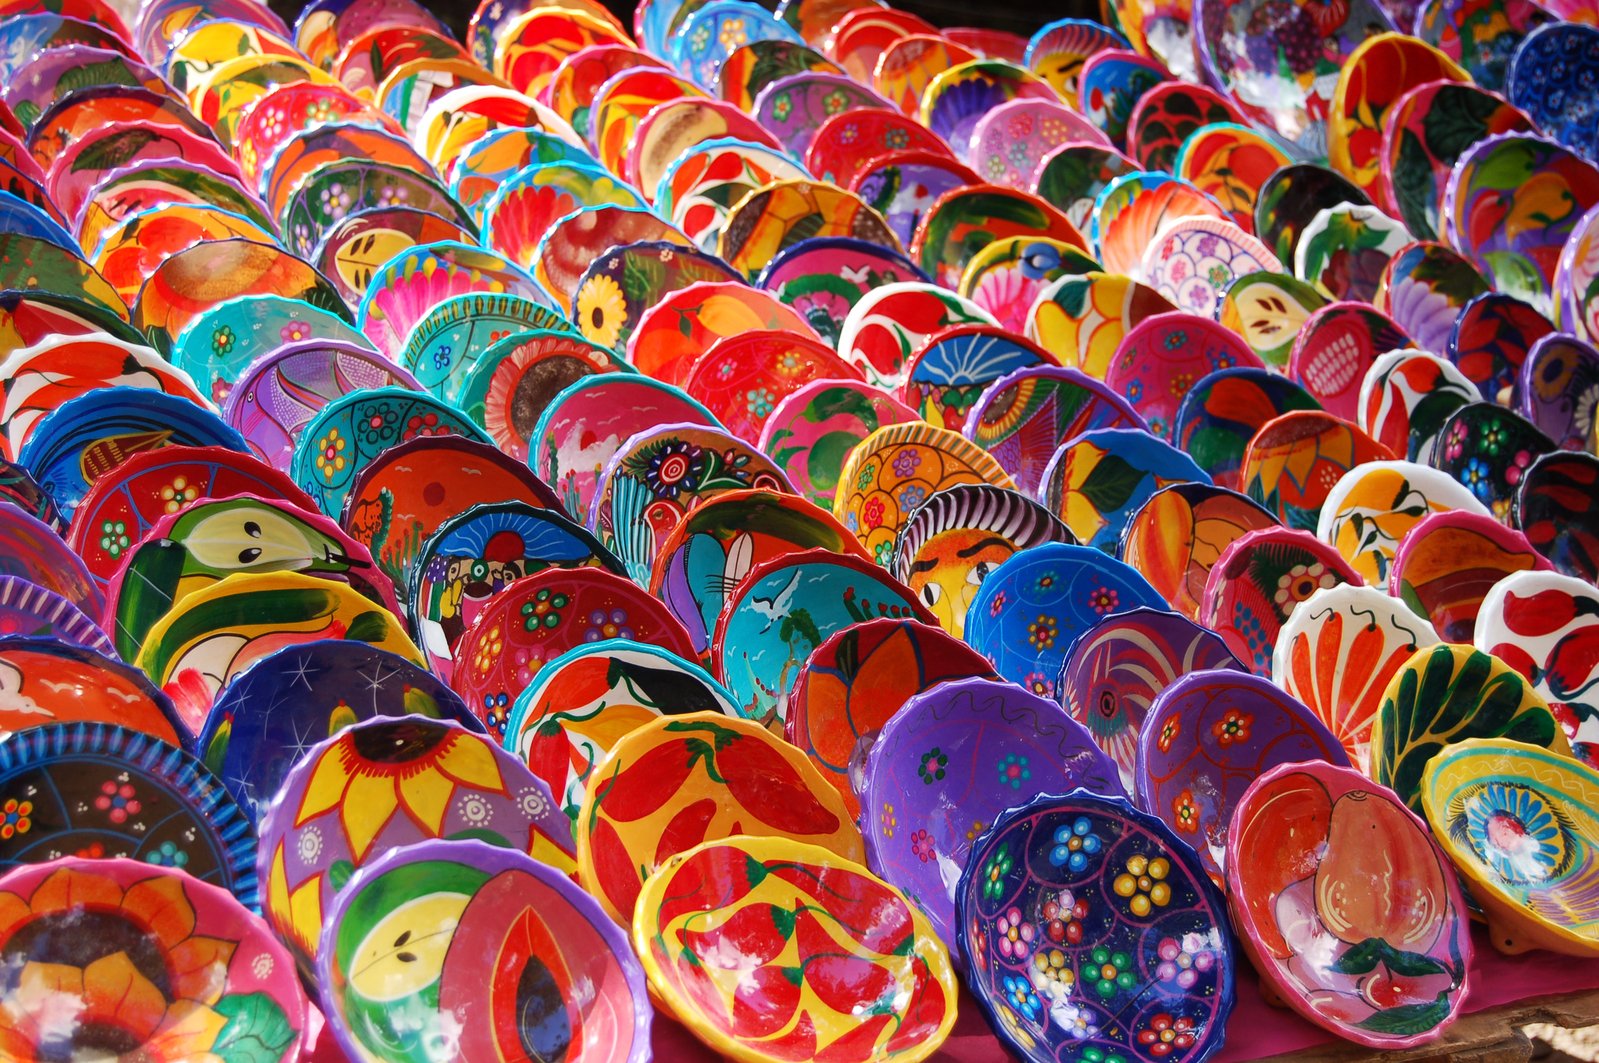 colorful plates are laid out in rows for sale